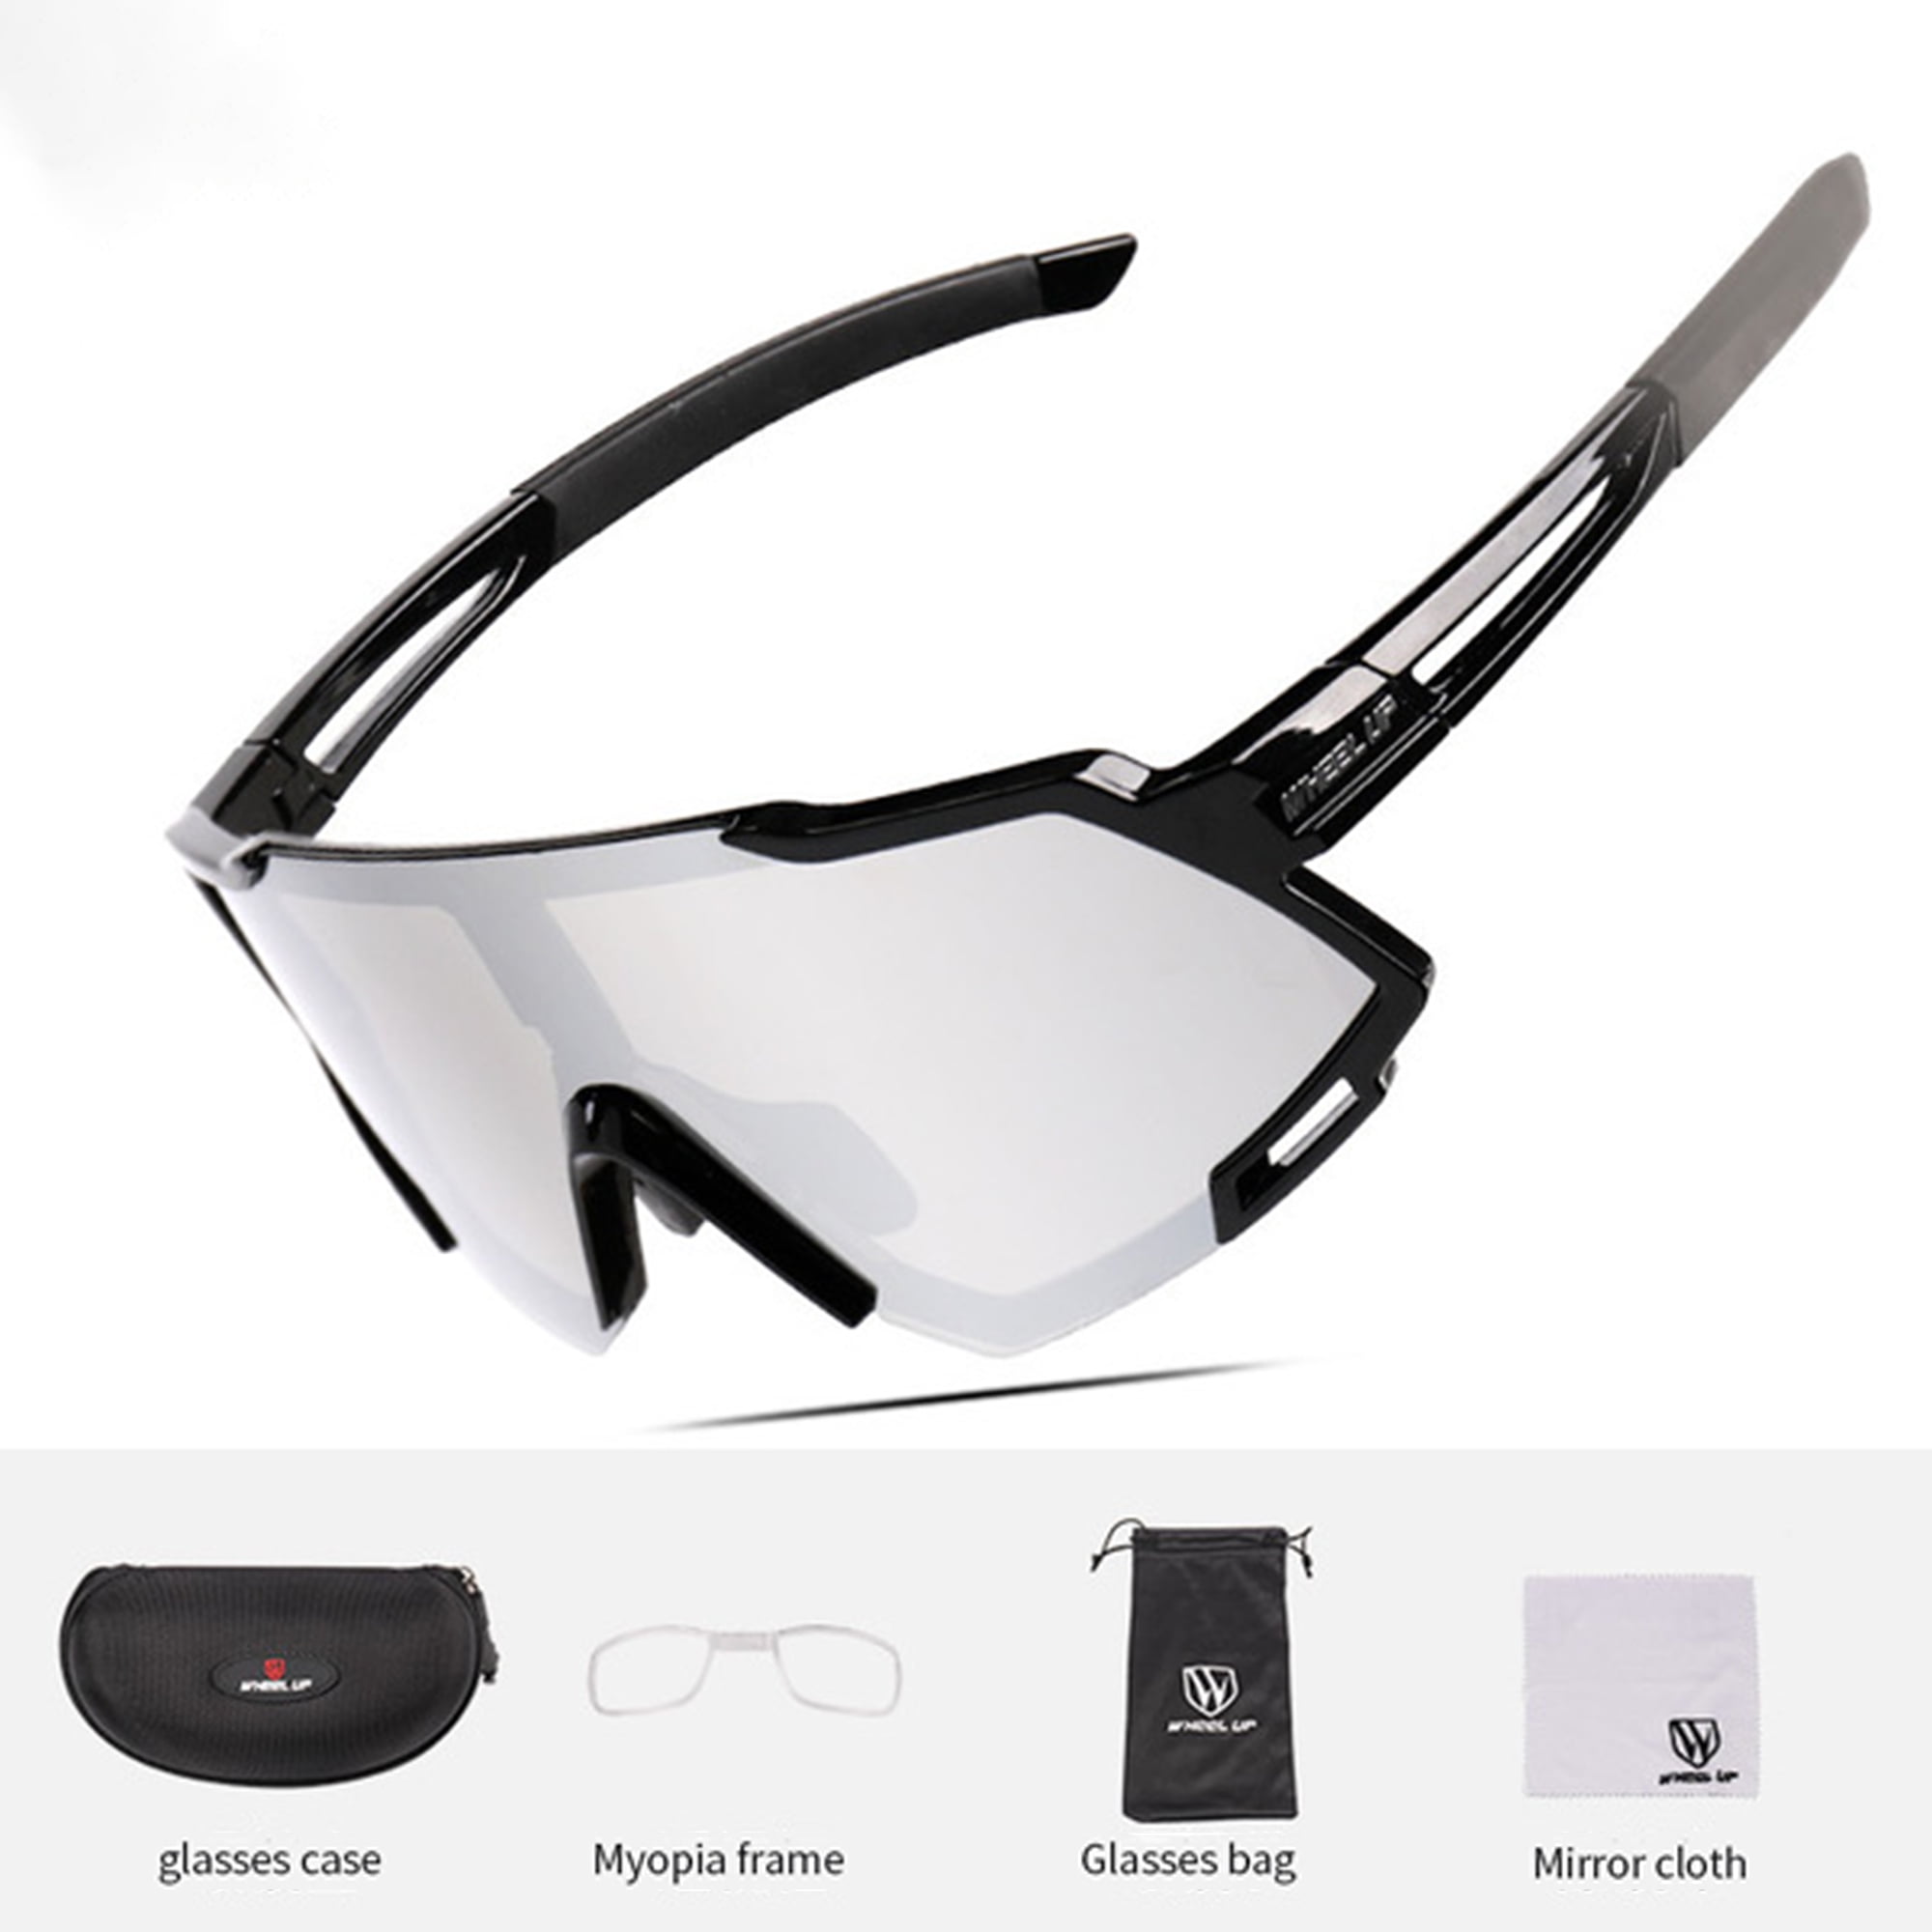 13 Mens Cycling Glasses Cycling Glasses Wind Cycling Glasses Cycling Glasses Bike Goggles for women/men Outdoor Sports Sunglasses UV400 Big Lens Spectacles Sunglasses Oculos Ciclismo 